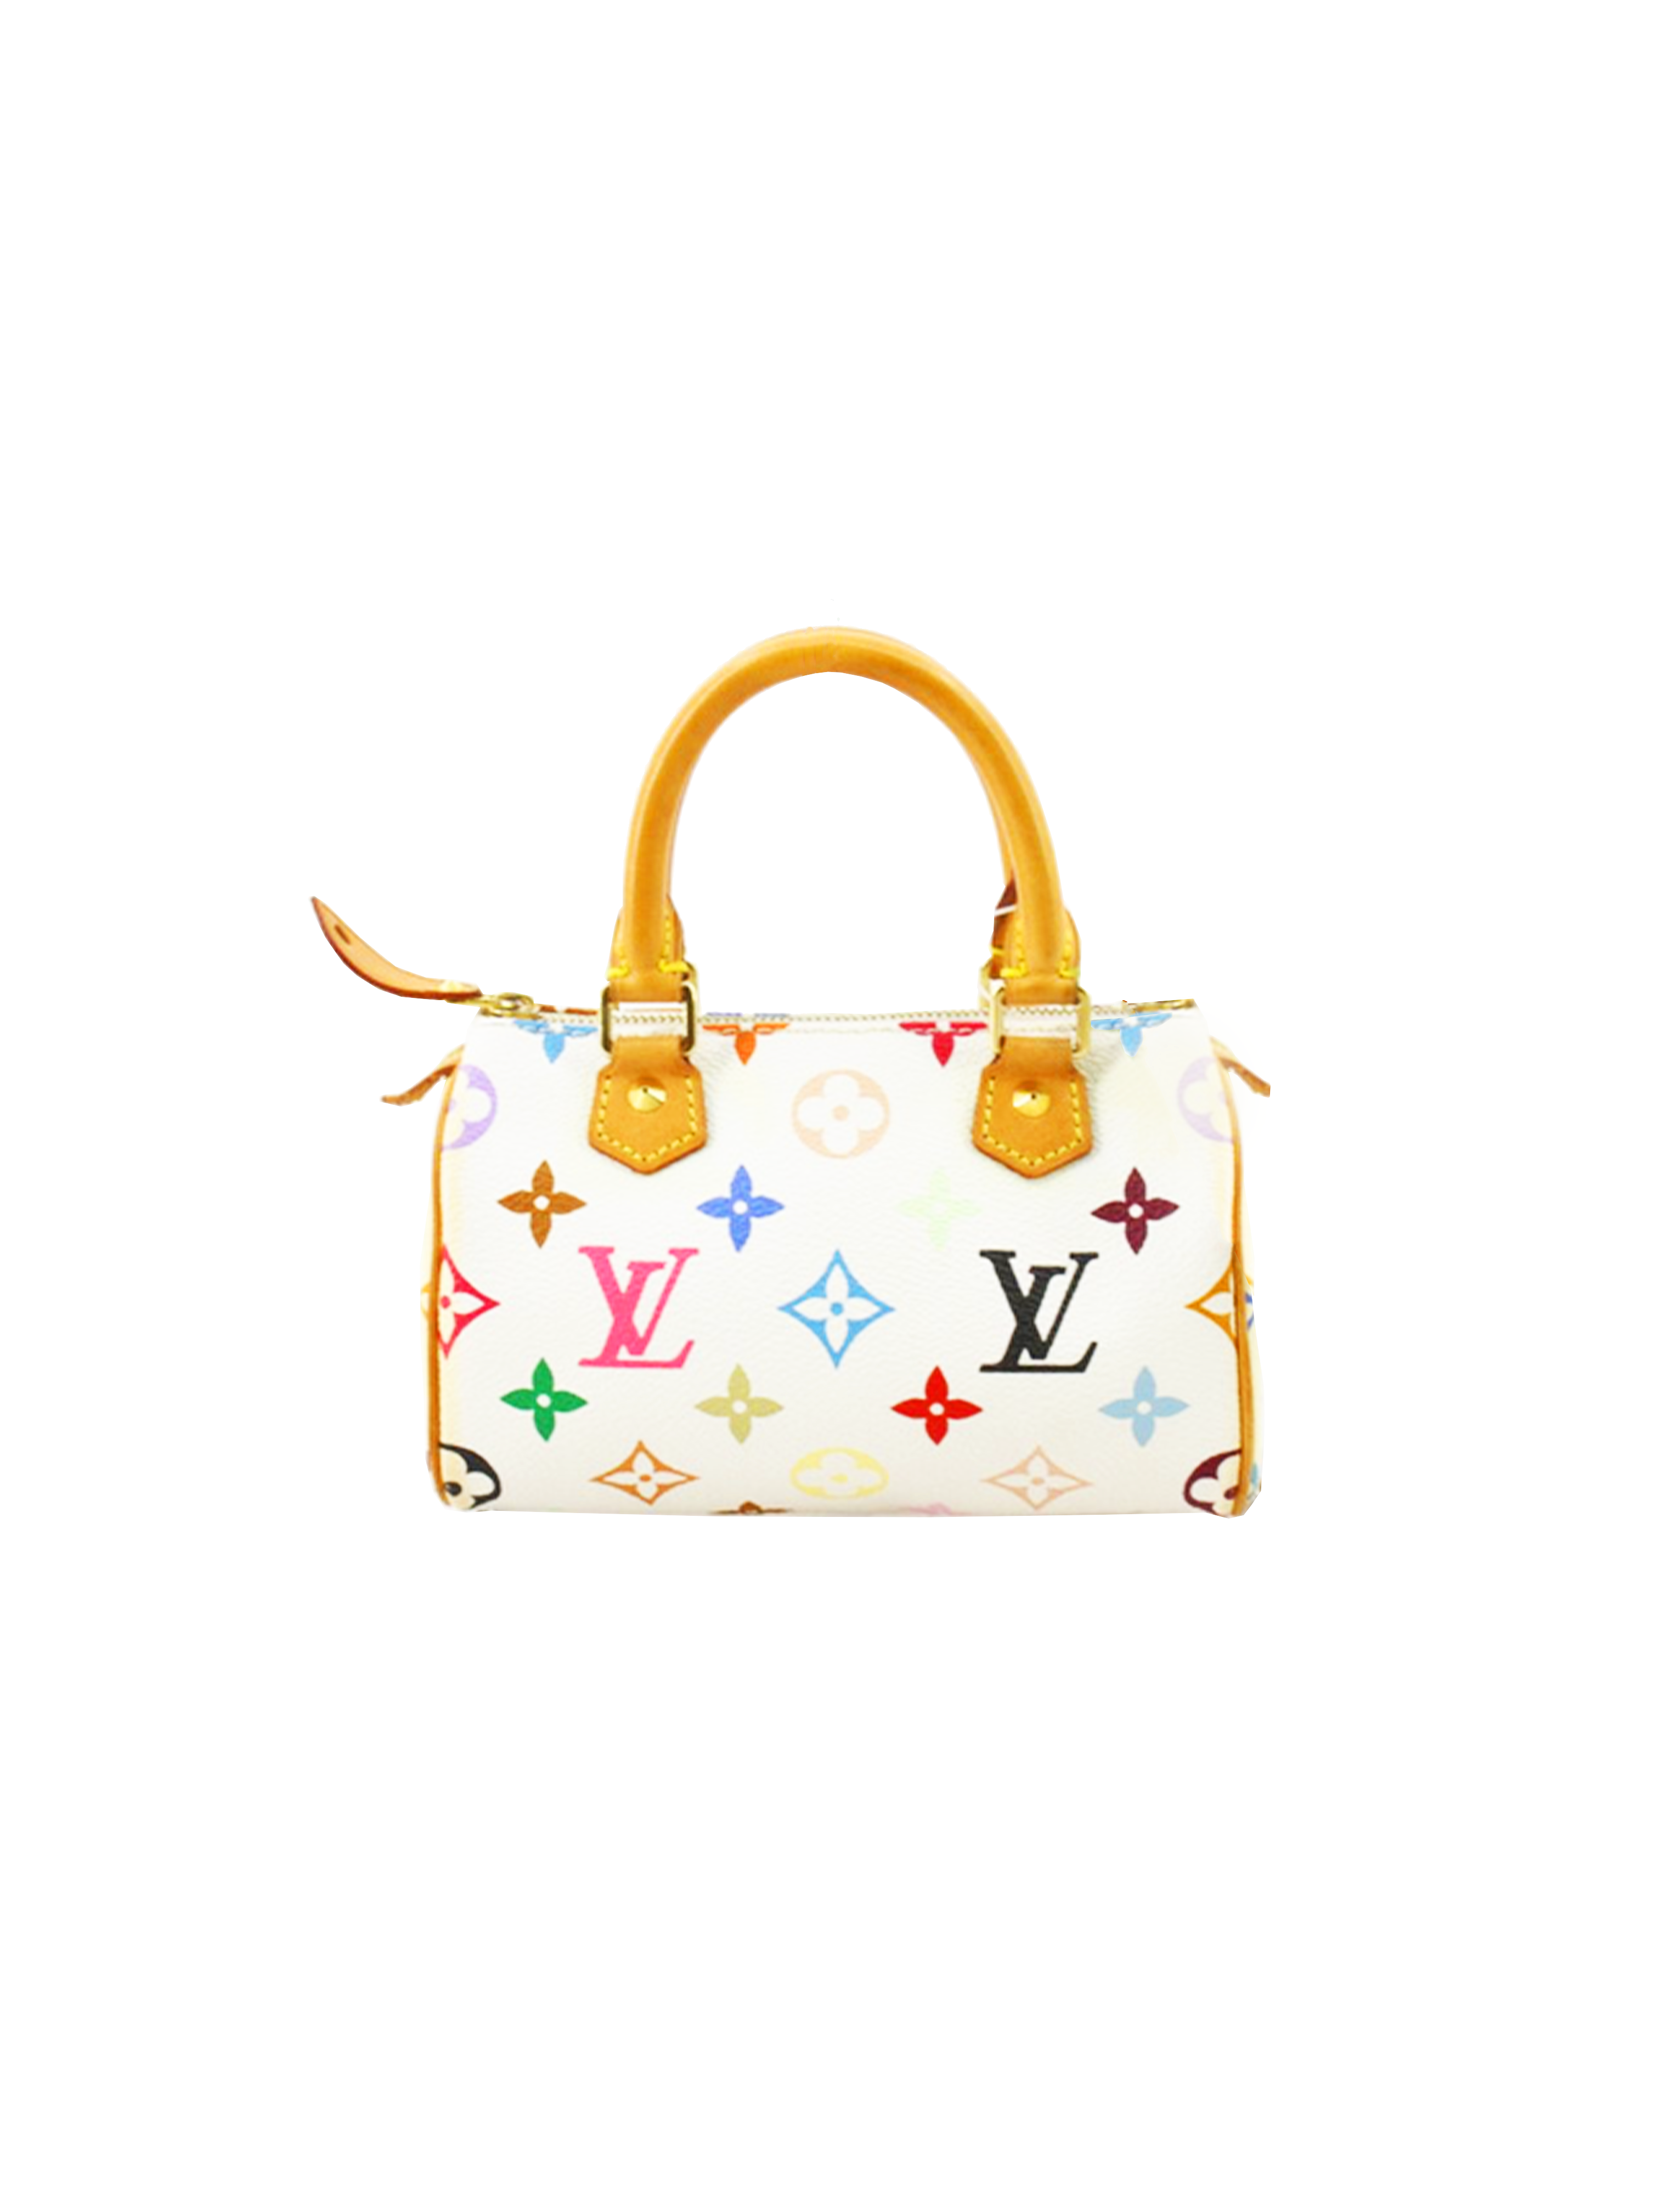 Louis Vuitton Limited Edition Ramages Collection available April